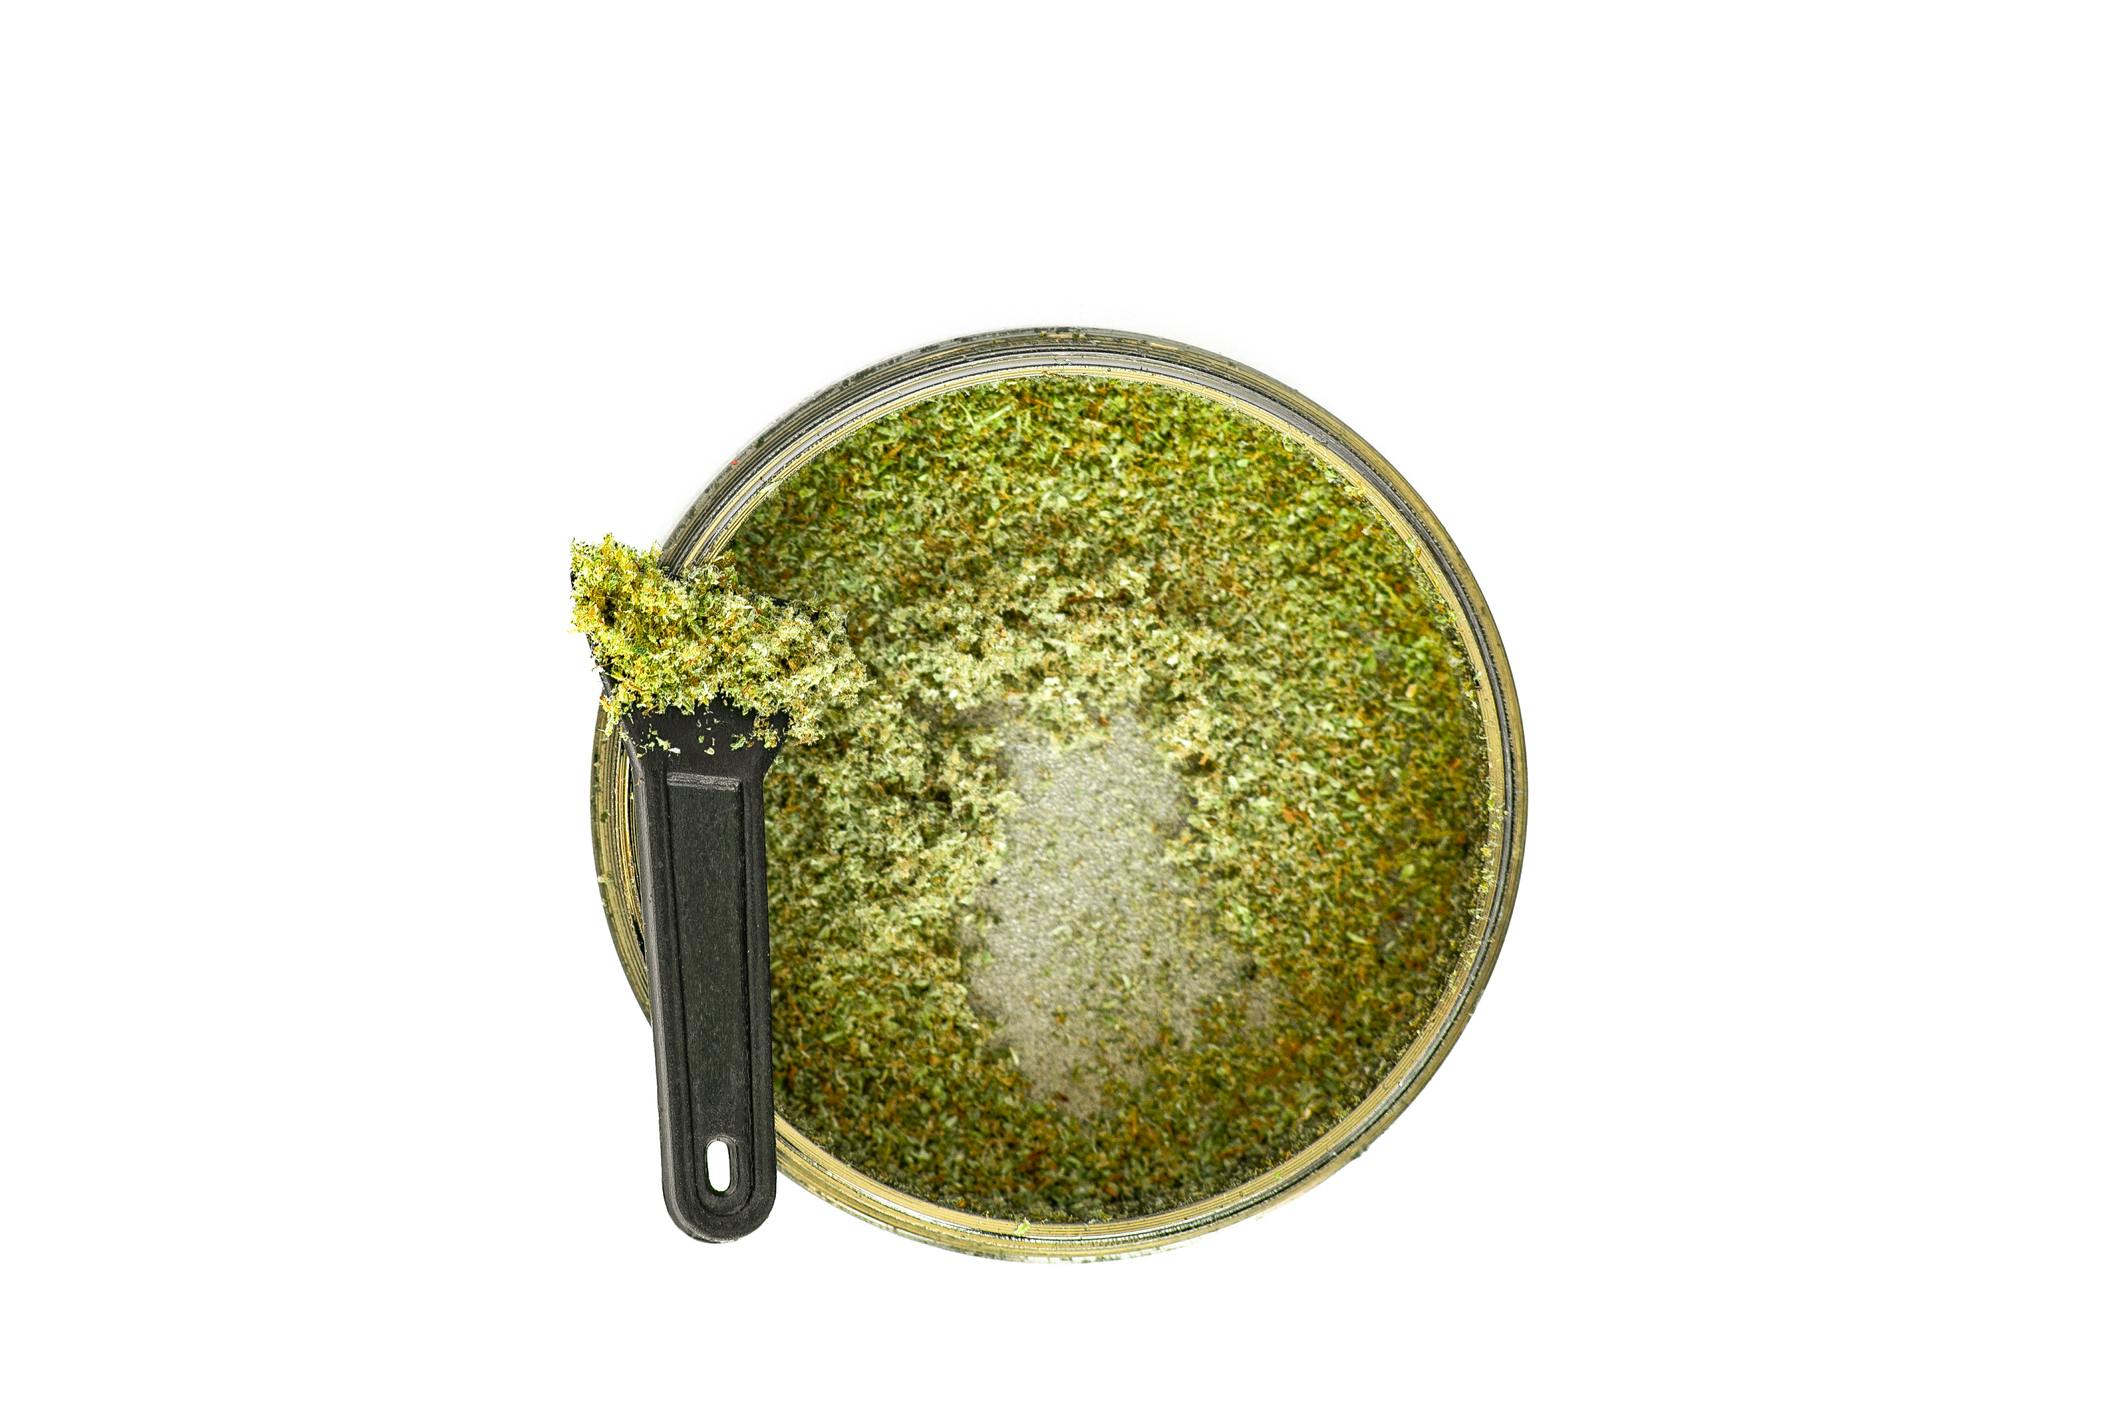 A weed grinder filled with kief, by Dmitry_Tishchenko via iStock